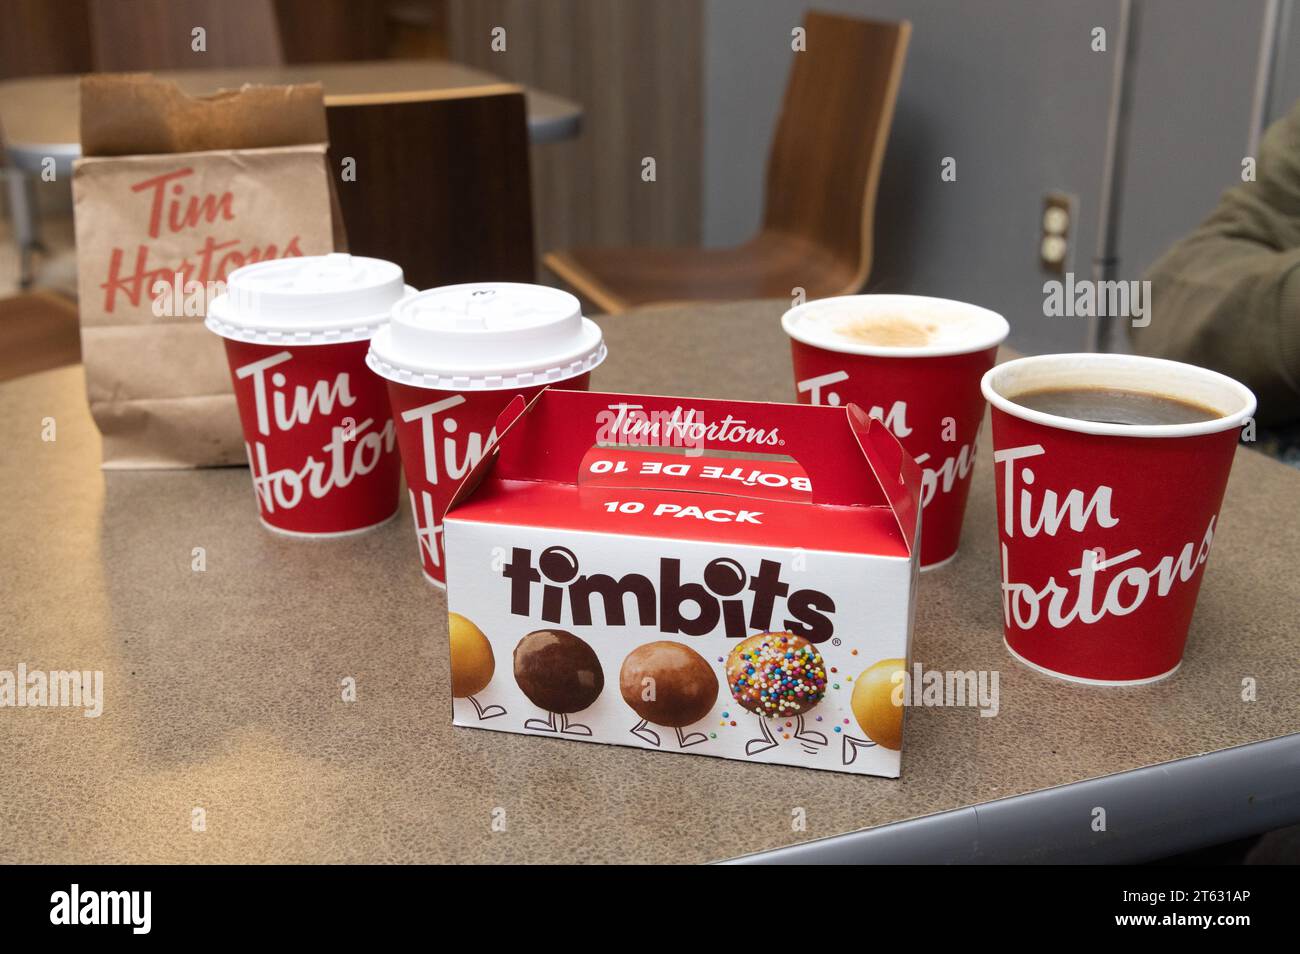 Tim Hortons coffee shop, coffee and food. A canadian cafe restaurant. Coffee cups and Timbits close up; Halifax Nova Scotia Canada. Stock Photo